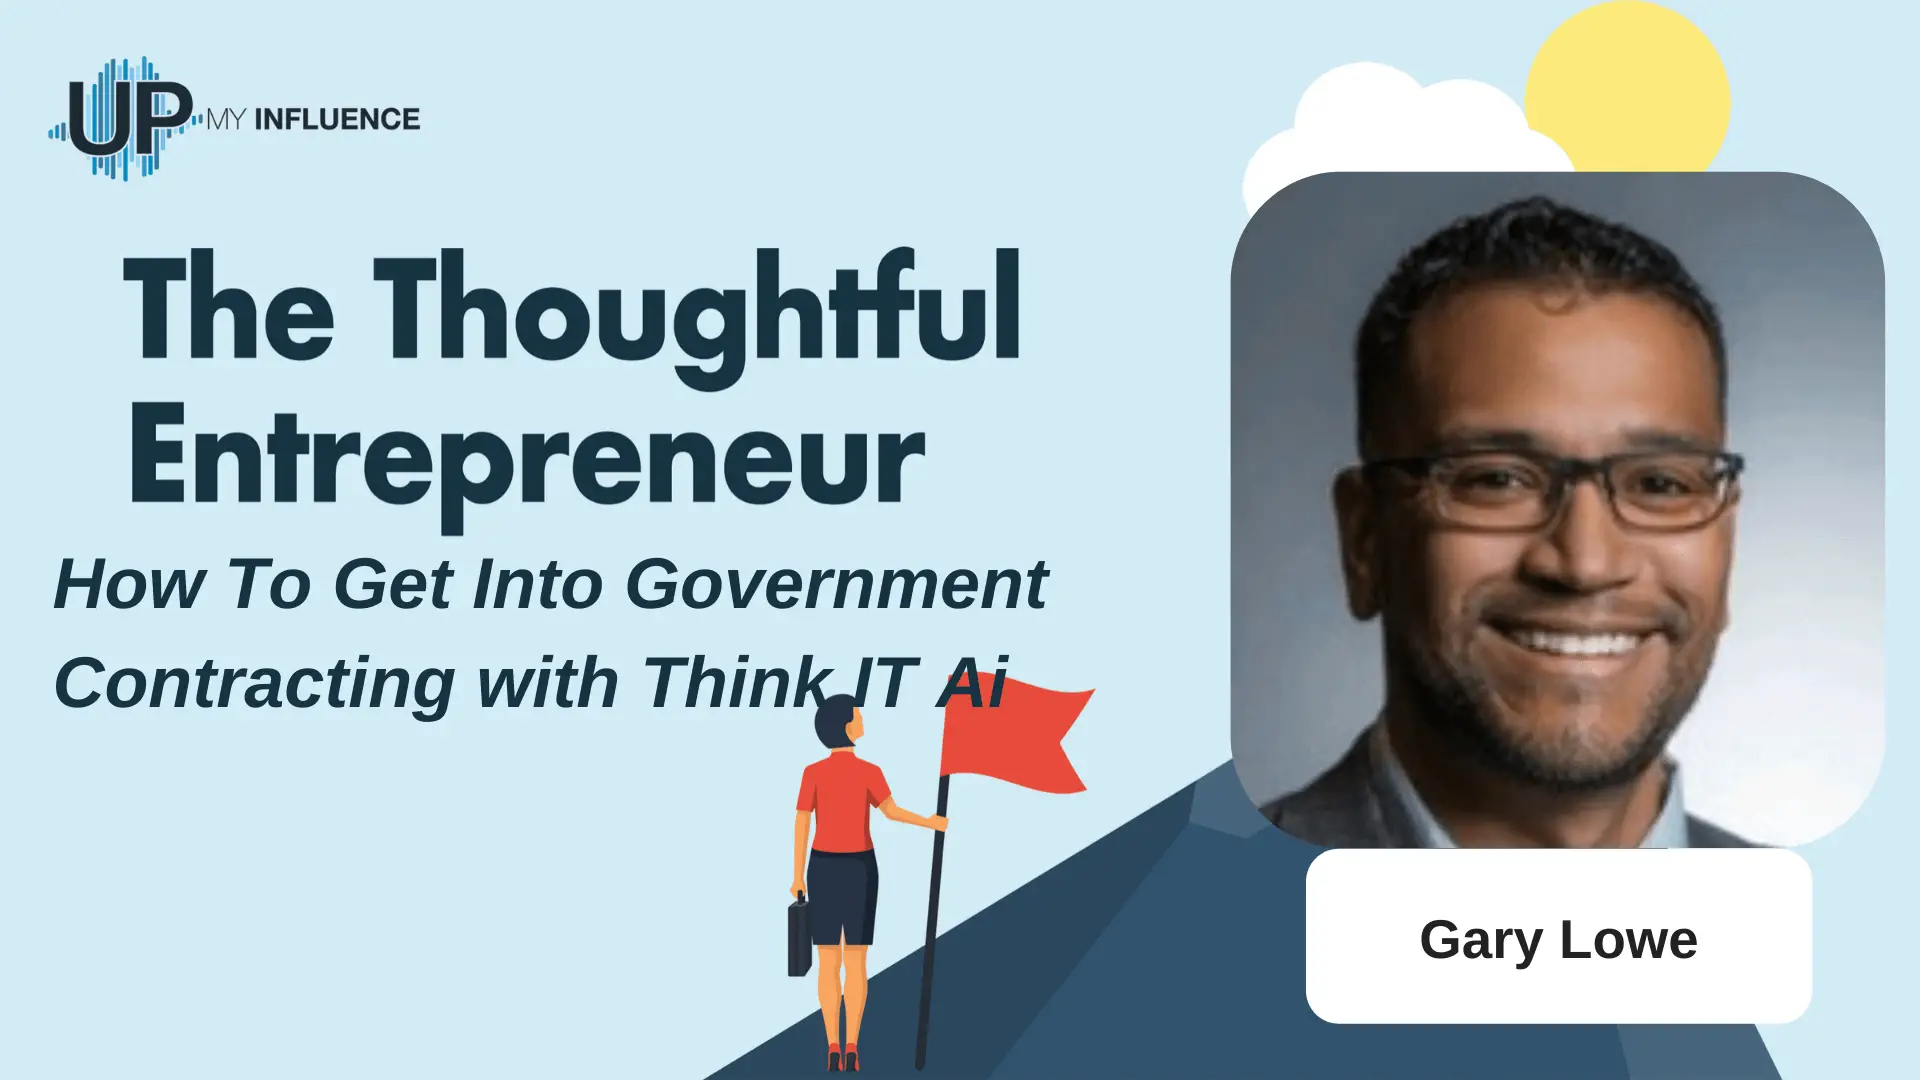 How To Get Into Government Contracting with Think IT Ai